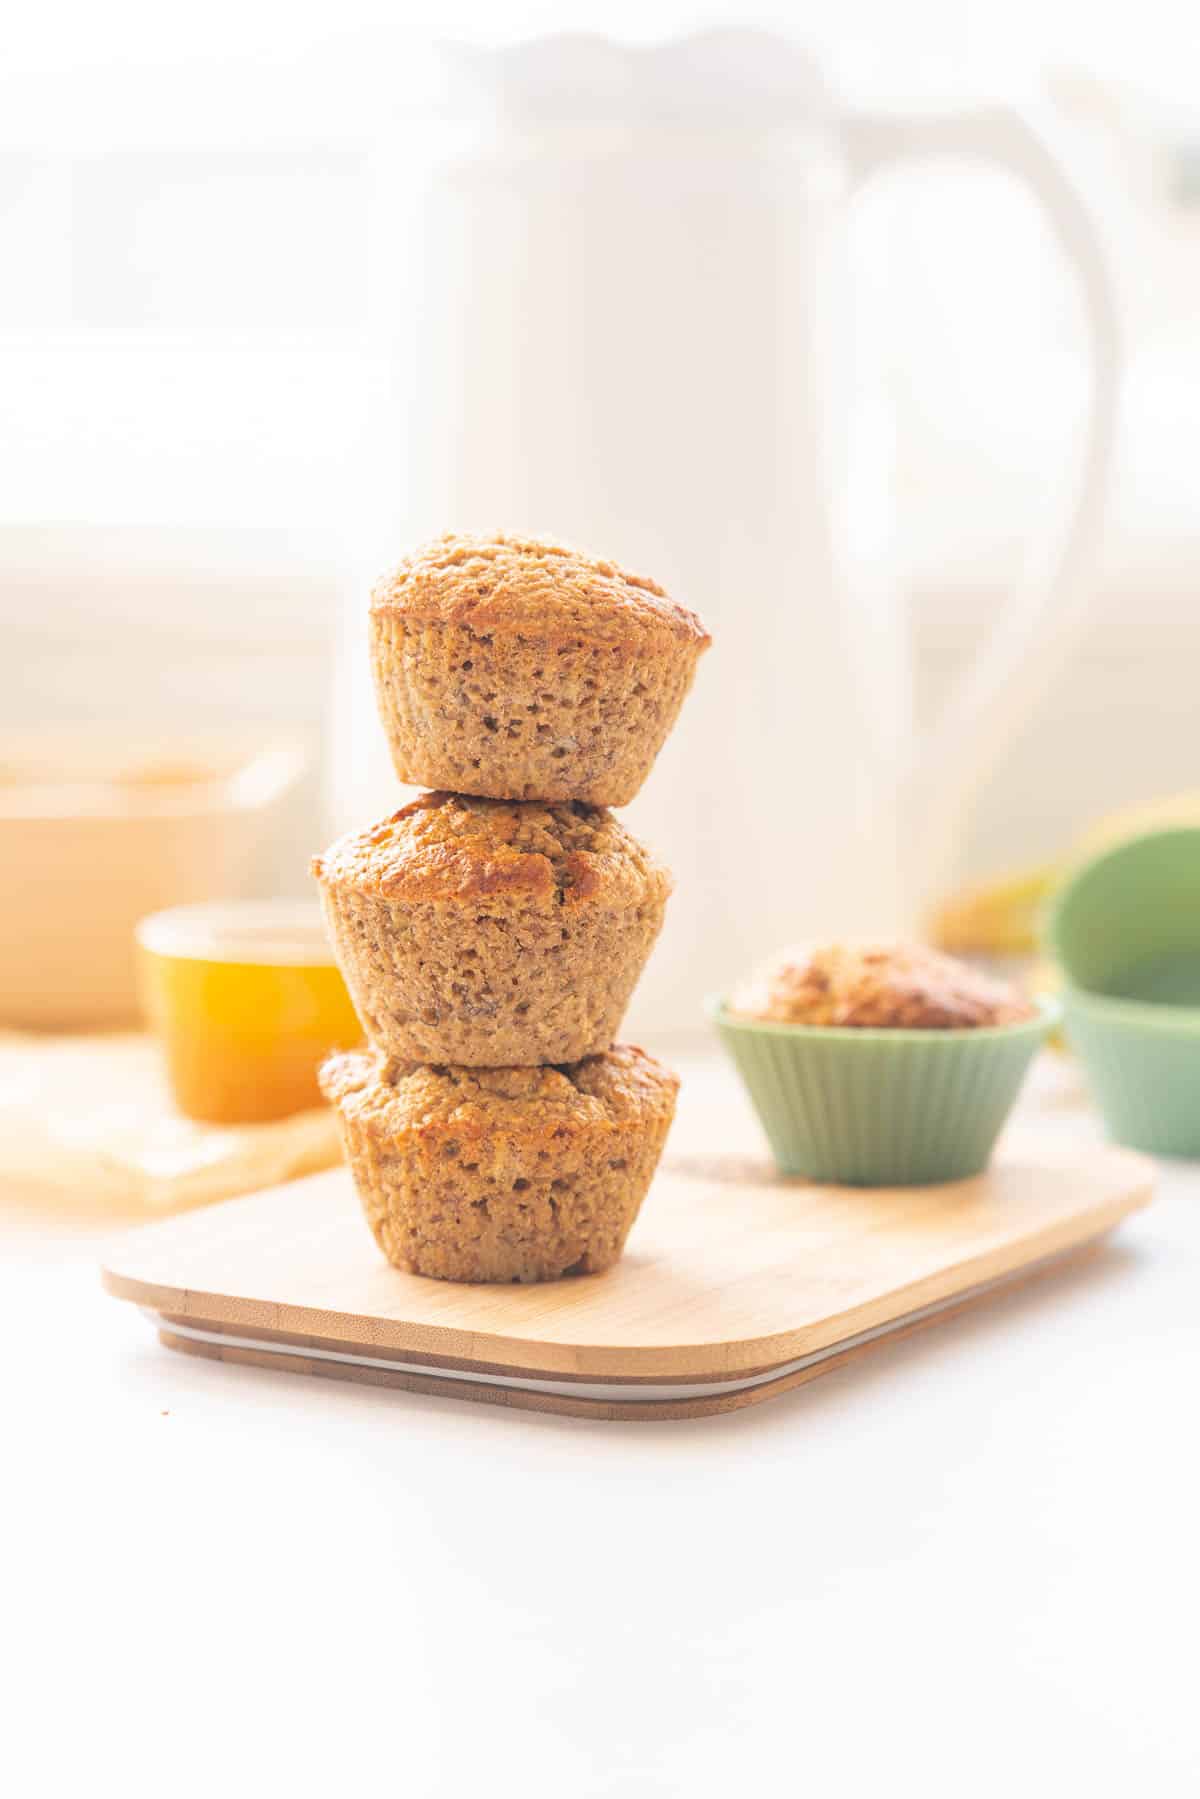 A tower of three bran muffins on a wooden board sitting in front of a white jug.